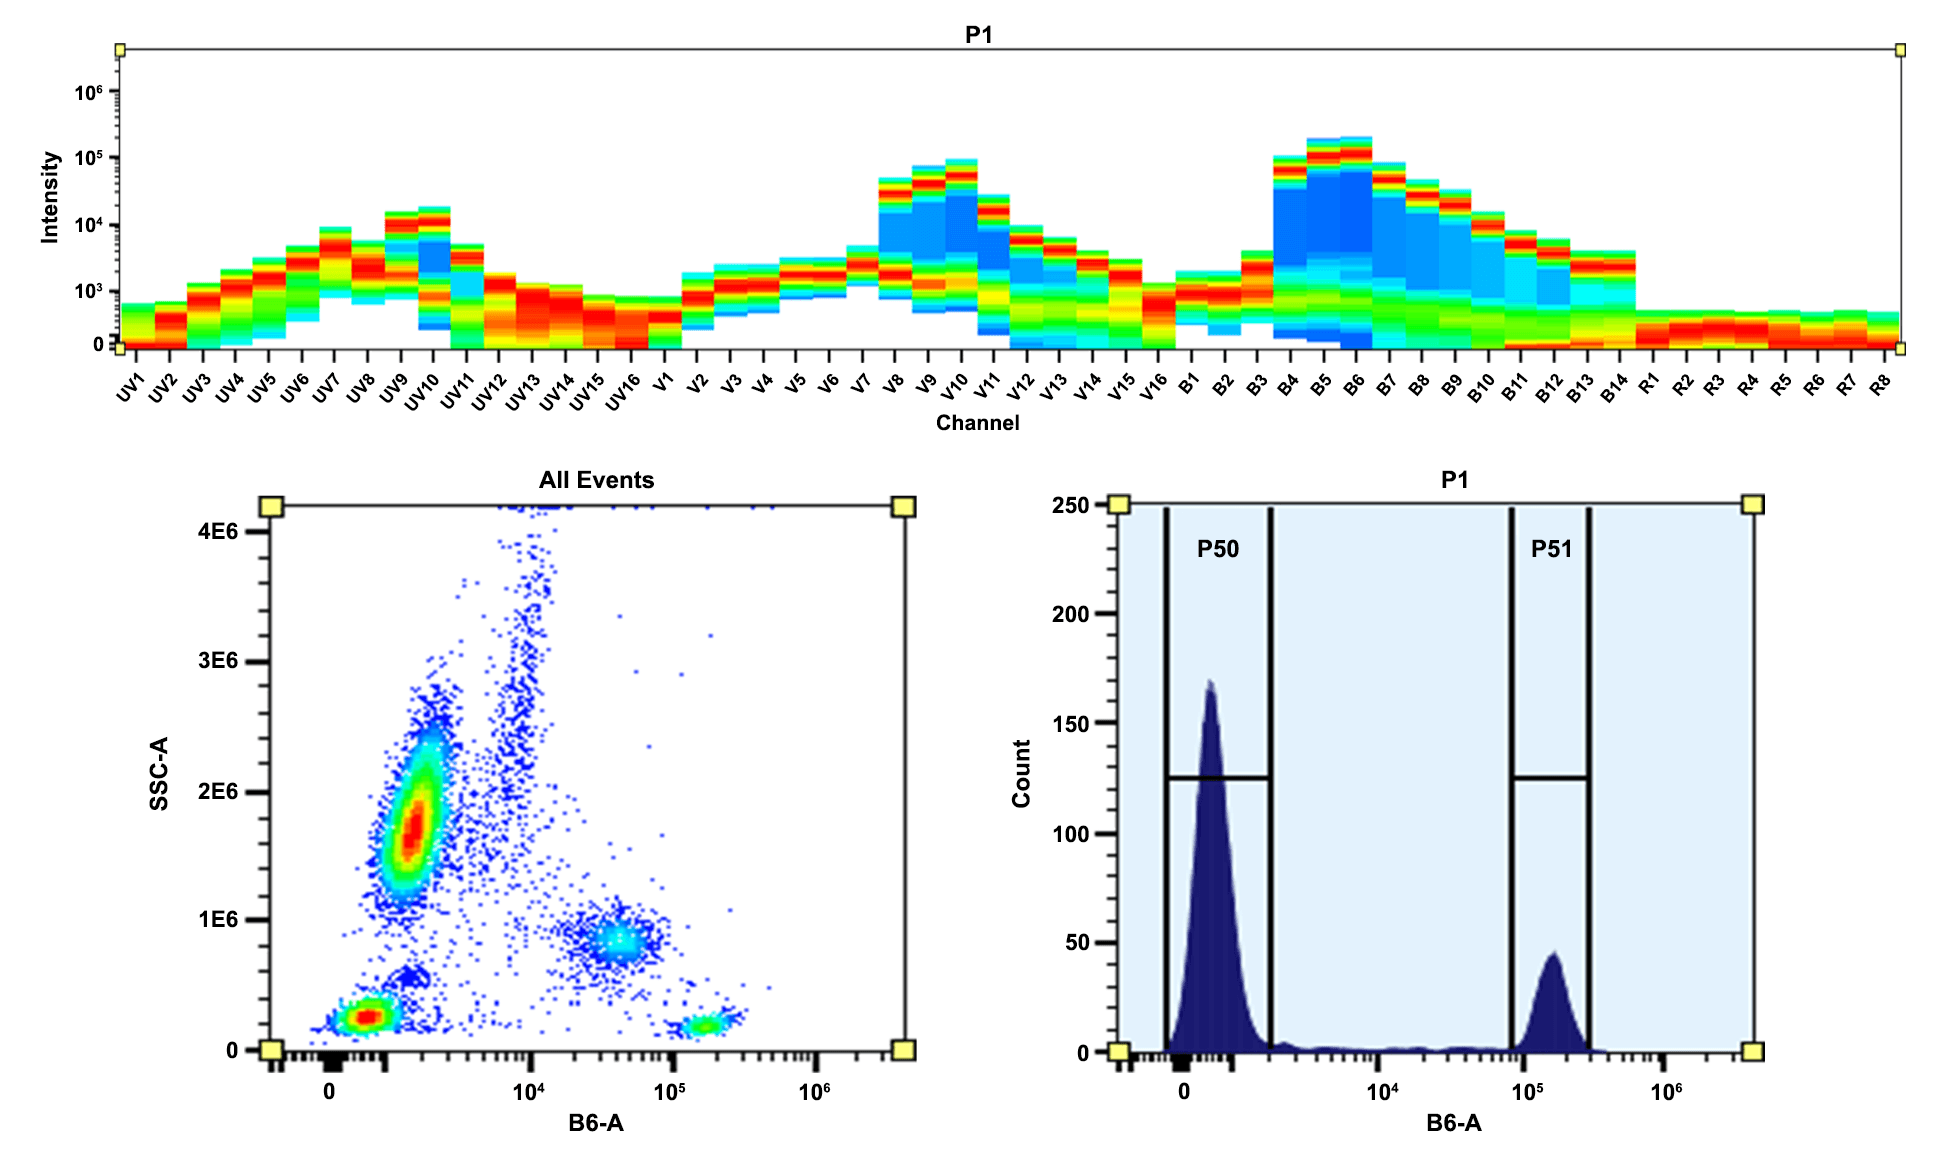 Top) Spectral pattern was generated using a 4-laser spectral cytometer. Spatially offset lasers (355 nm, 405 nm, 488 nm, and 640 nm) were used to create four distinct emission profiles, then, when combined, yielded the overall spectral signature. Bottom) Flow cytometry analysis of whole blood cells stained with PE/iFluor® 594 anti-human CD4 *SK3* conjugate. The fluorescence signal was monitored using an Aurora spectral flow cytometer in the PE/iFluor® 594 specific B6-A channel.
